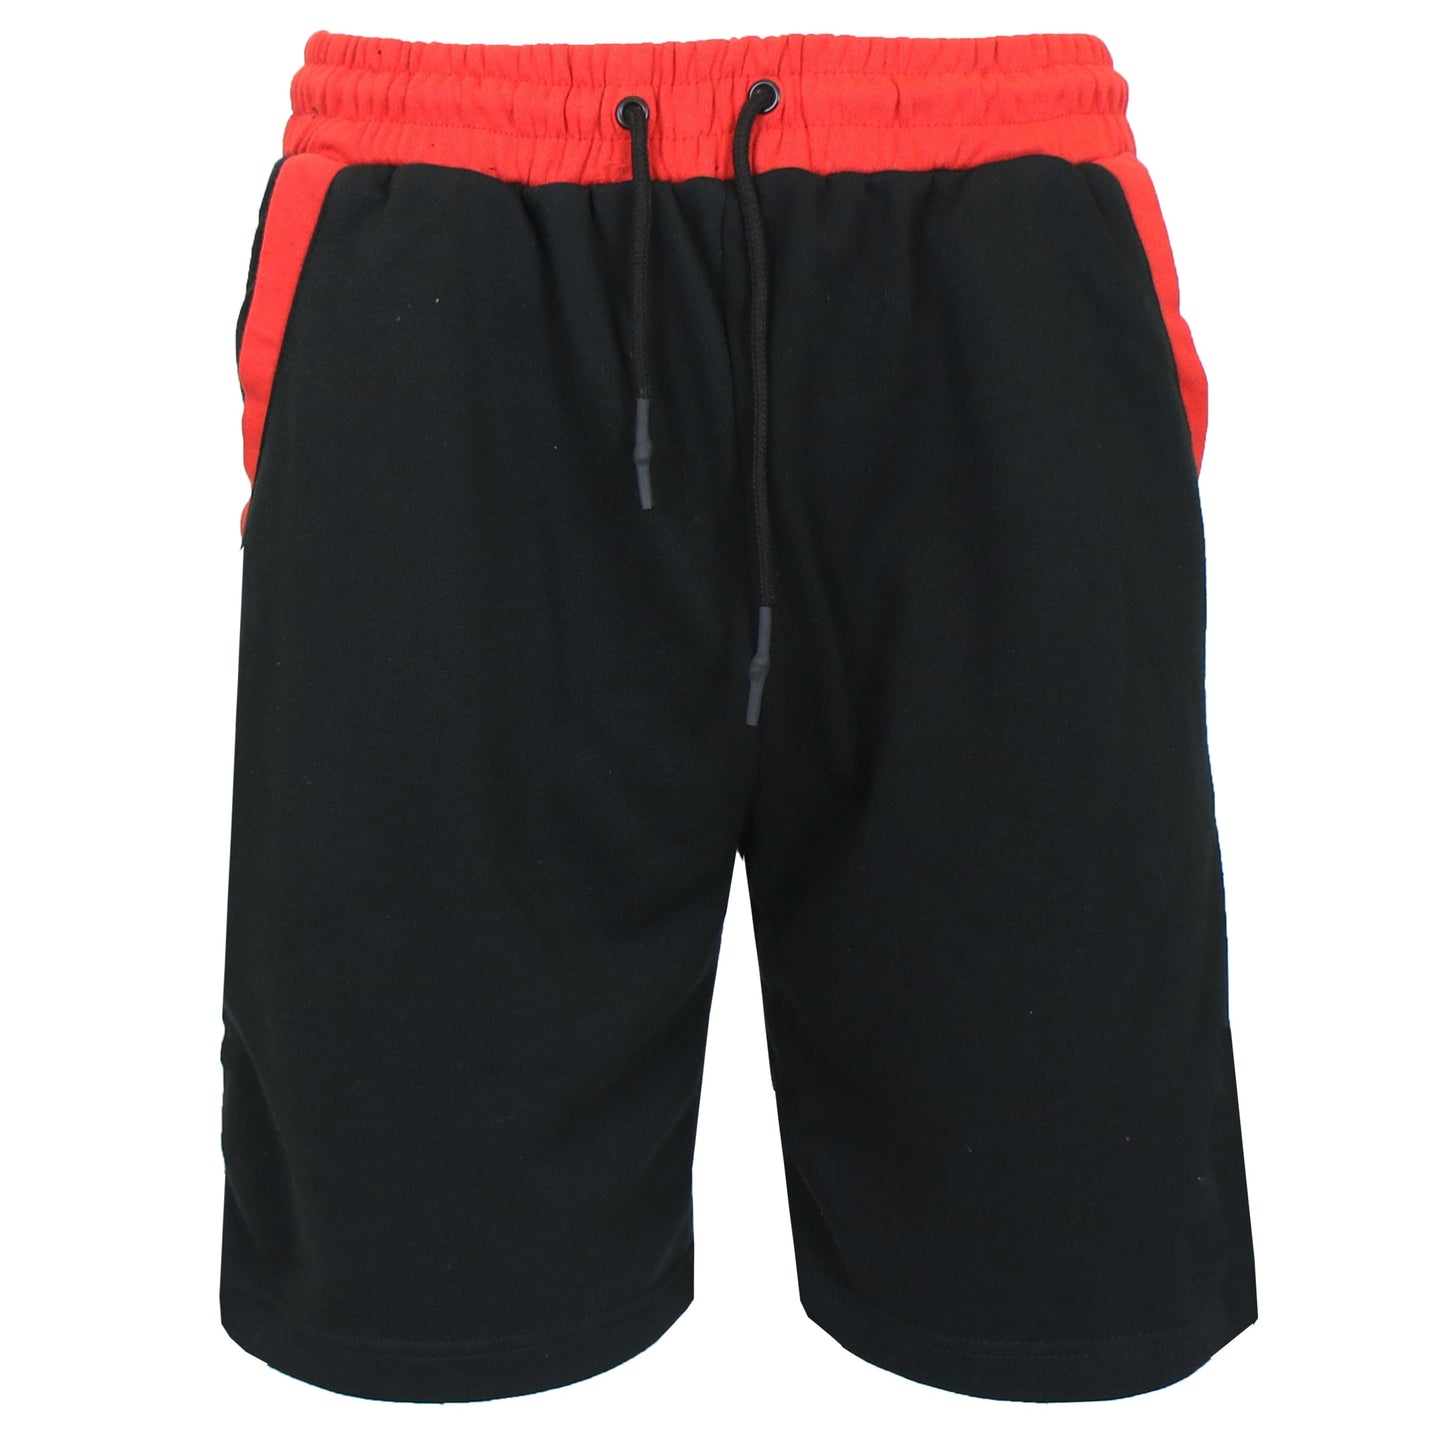 Men's French Terry Sweat Shorts With Contrast Trim - GalaxybyHarvic